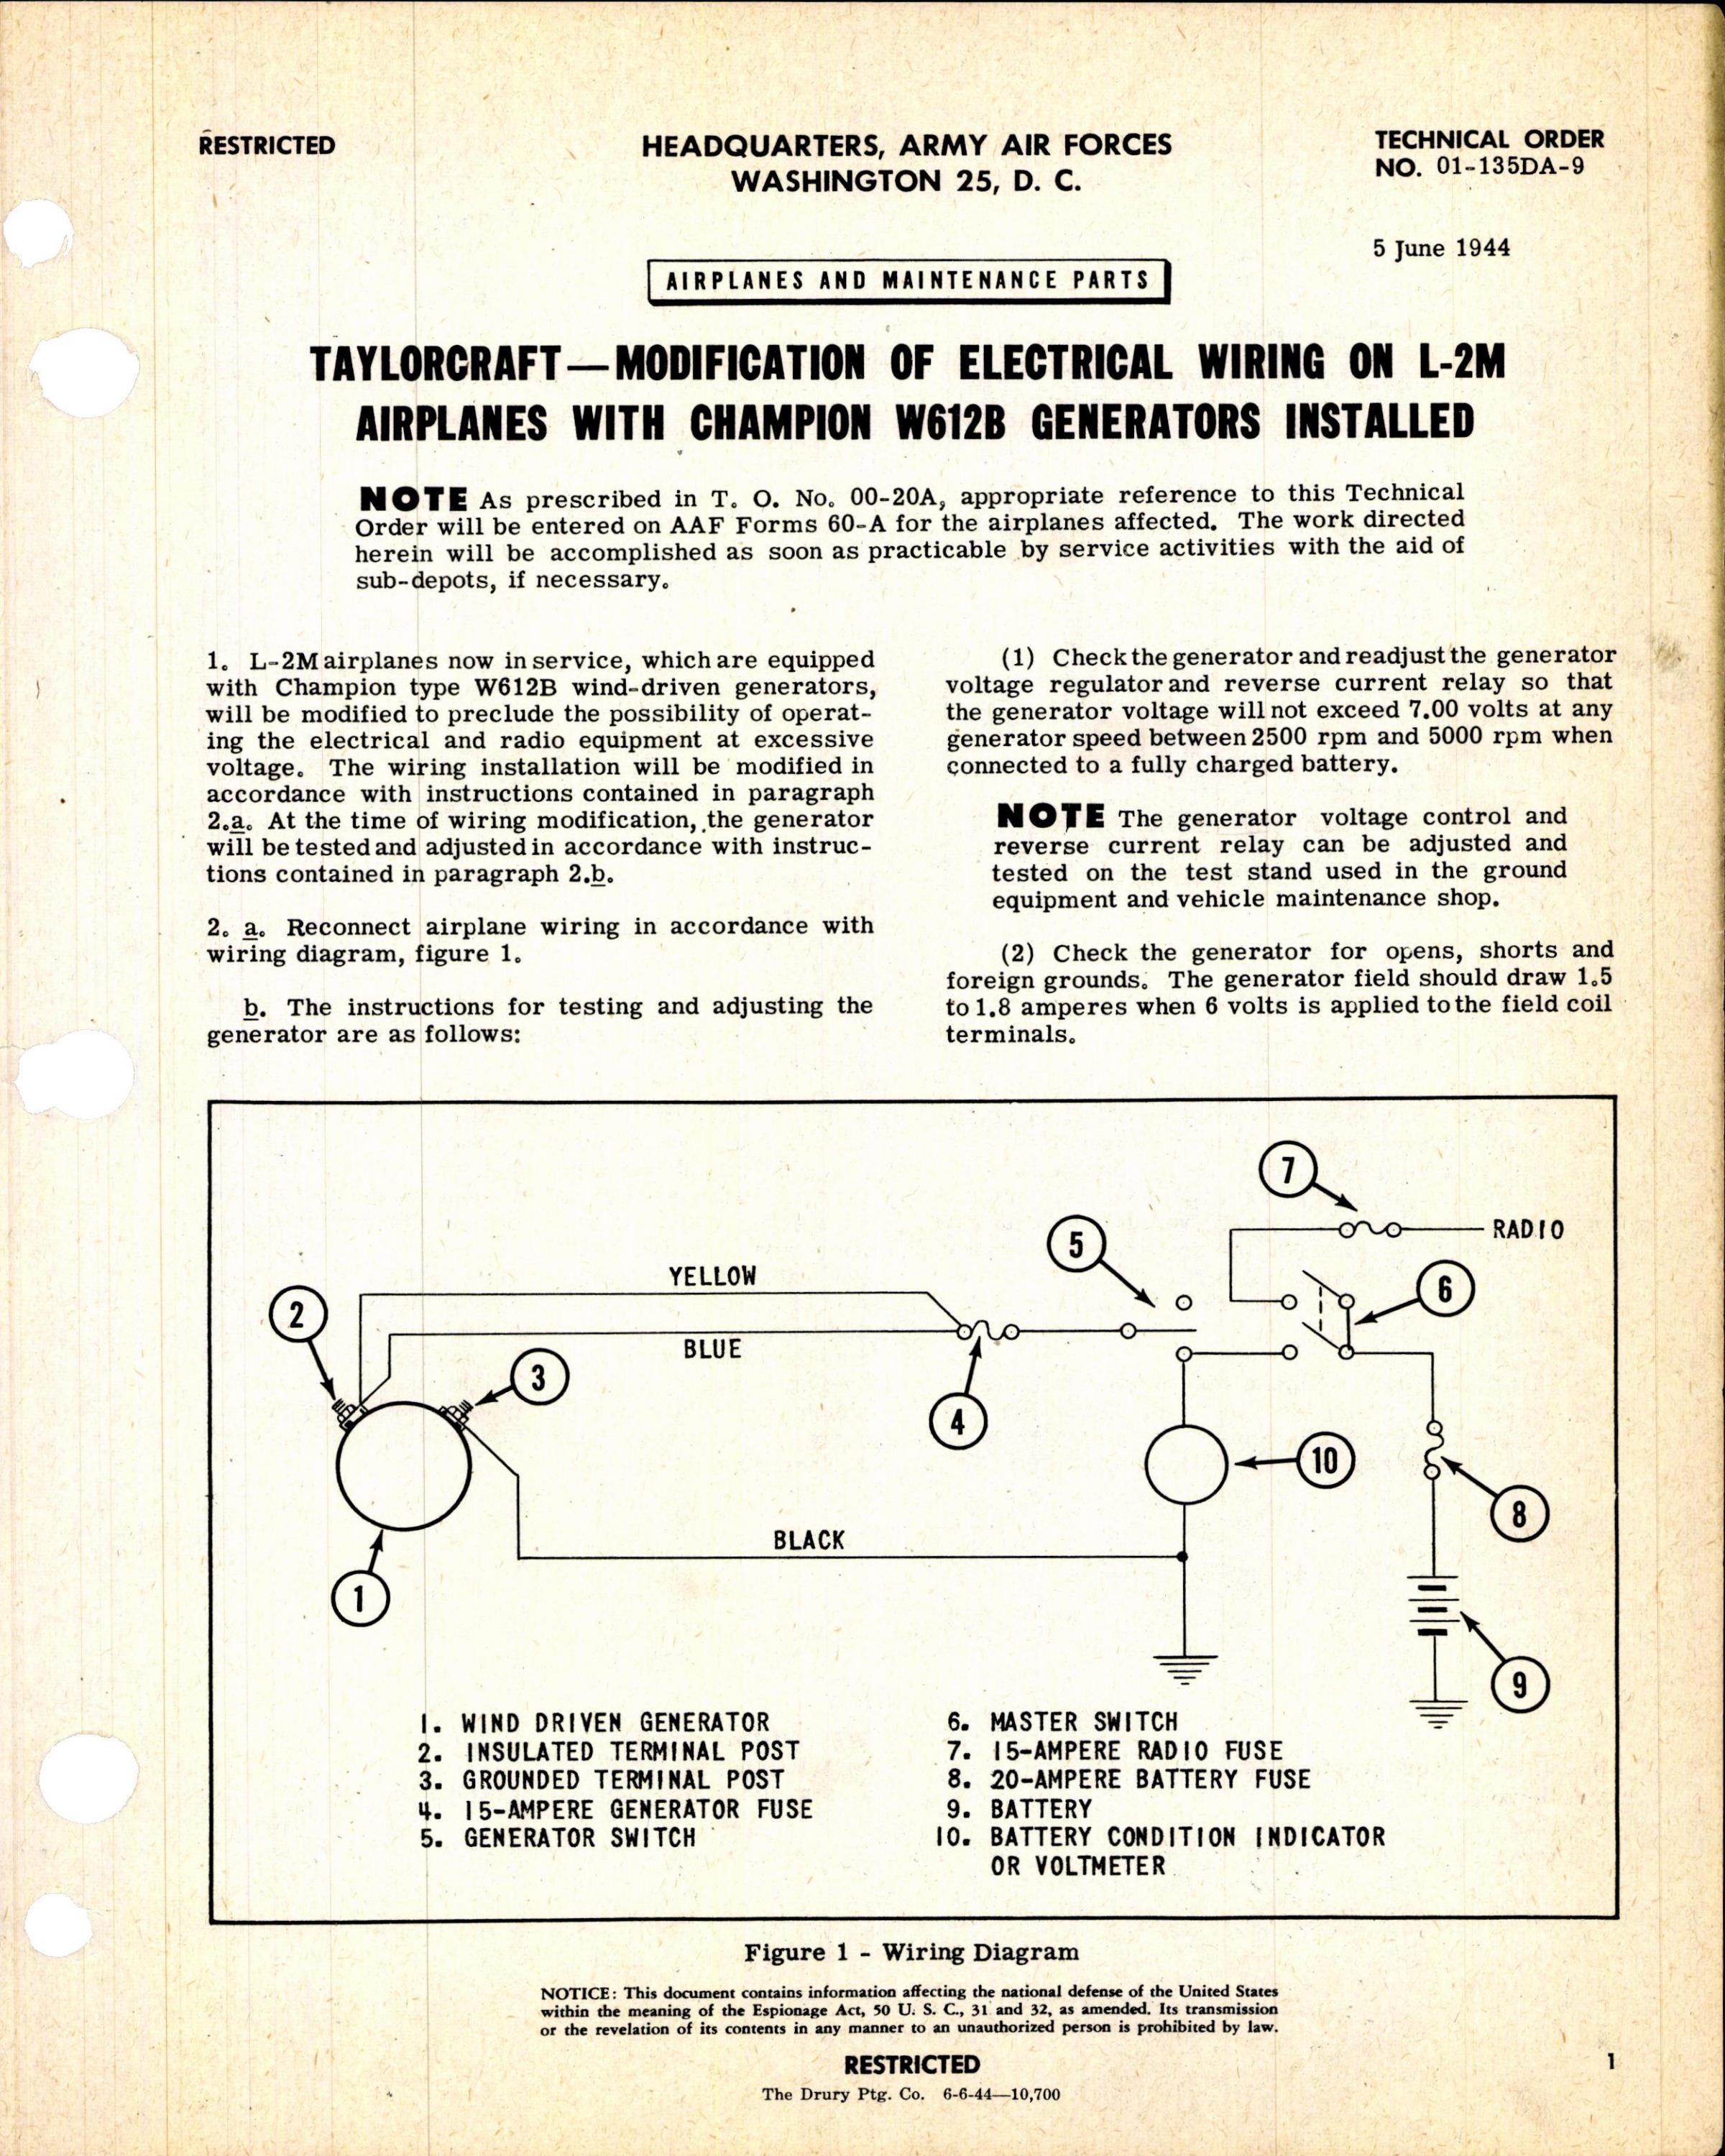 Sample page 1 from AirCorps Library document: Modification of Electrical Wiring on L-2M w/ Champion W612B Generators